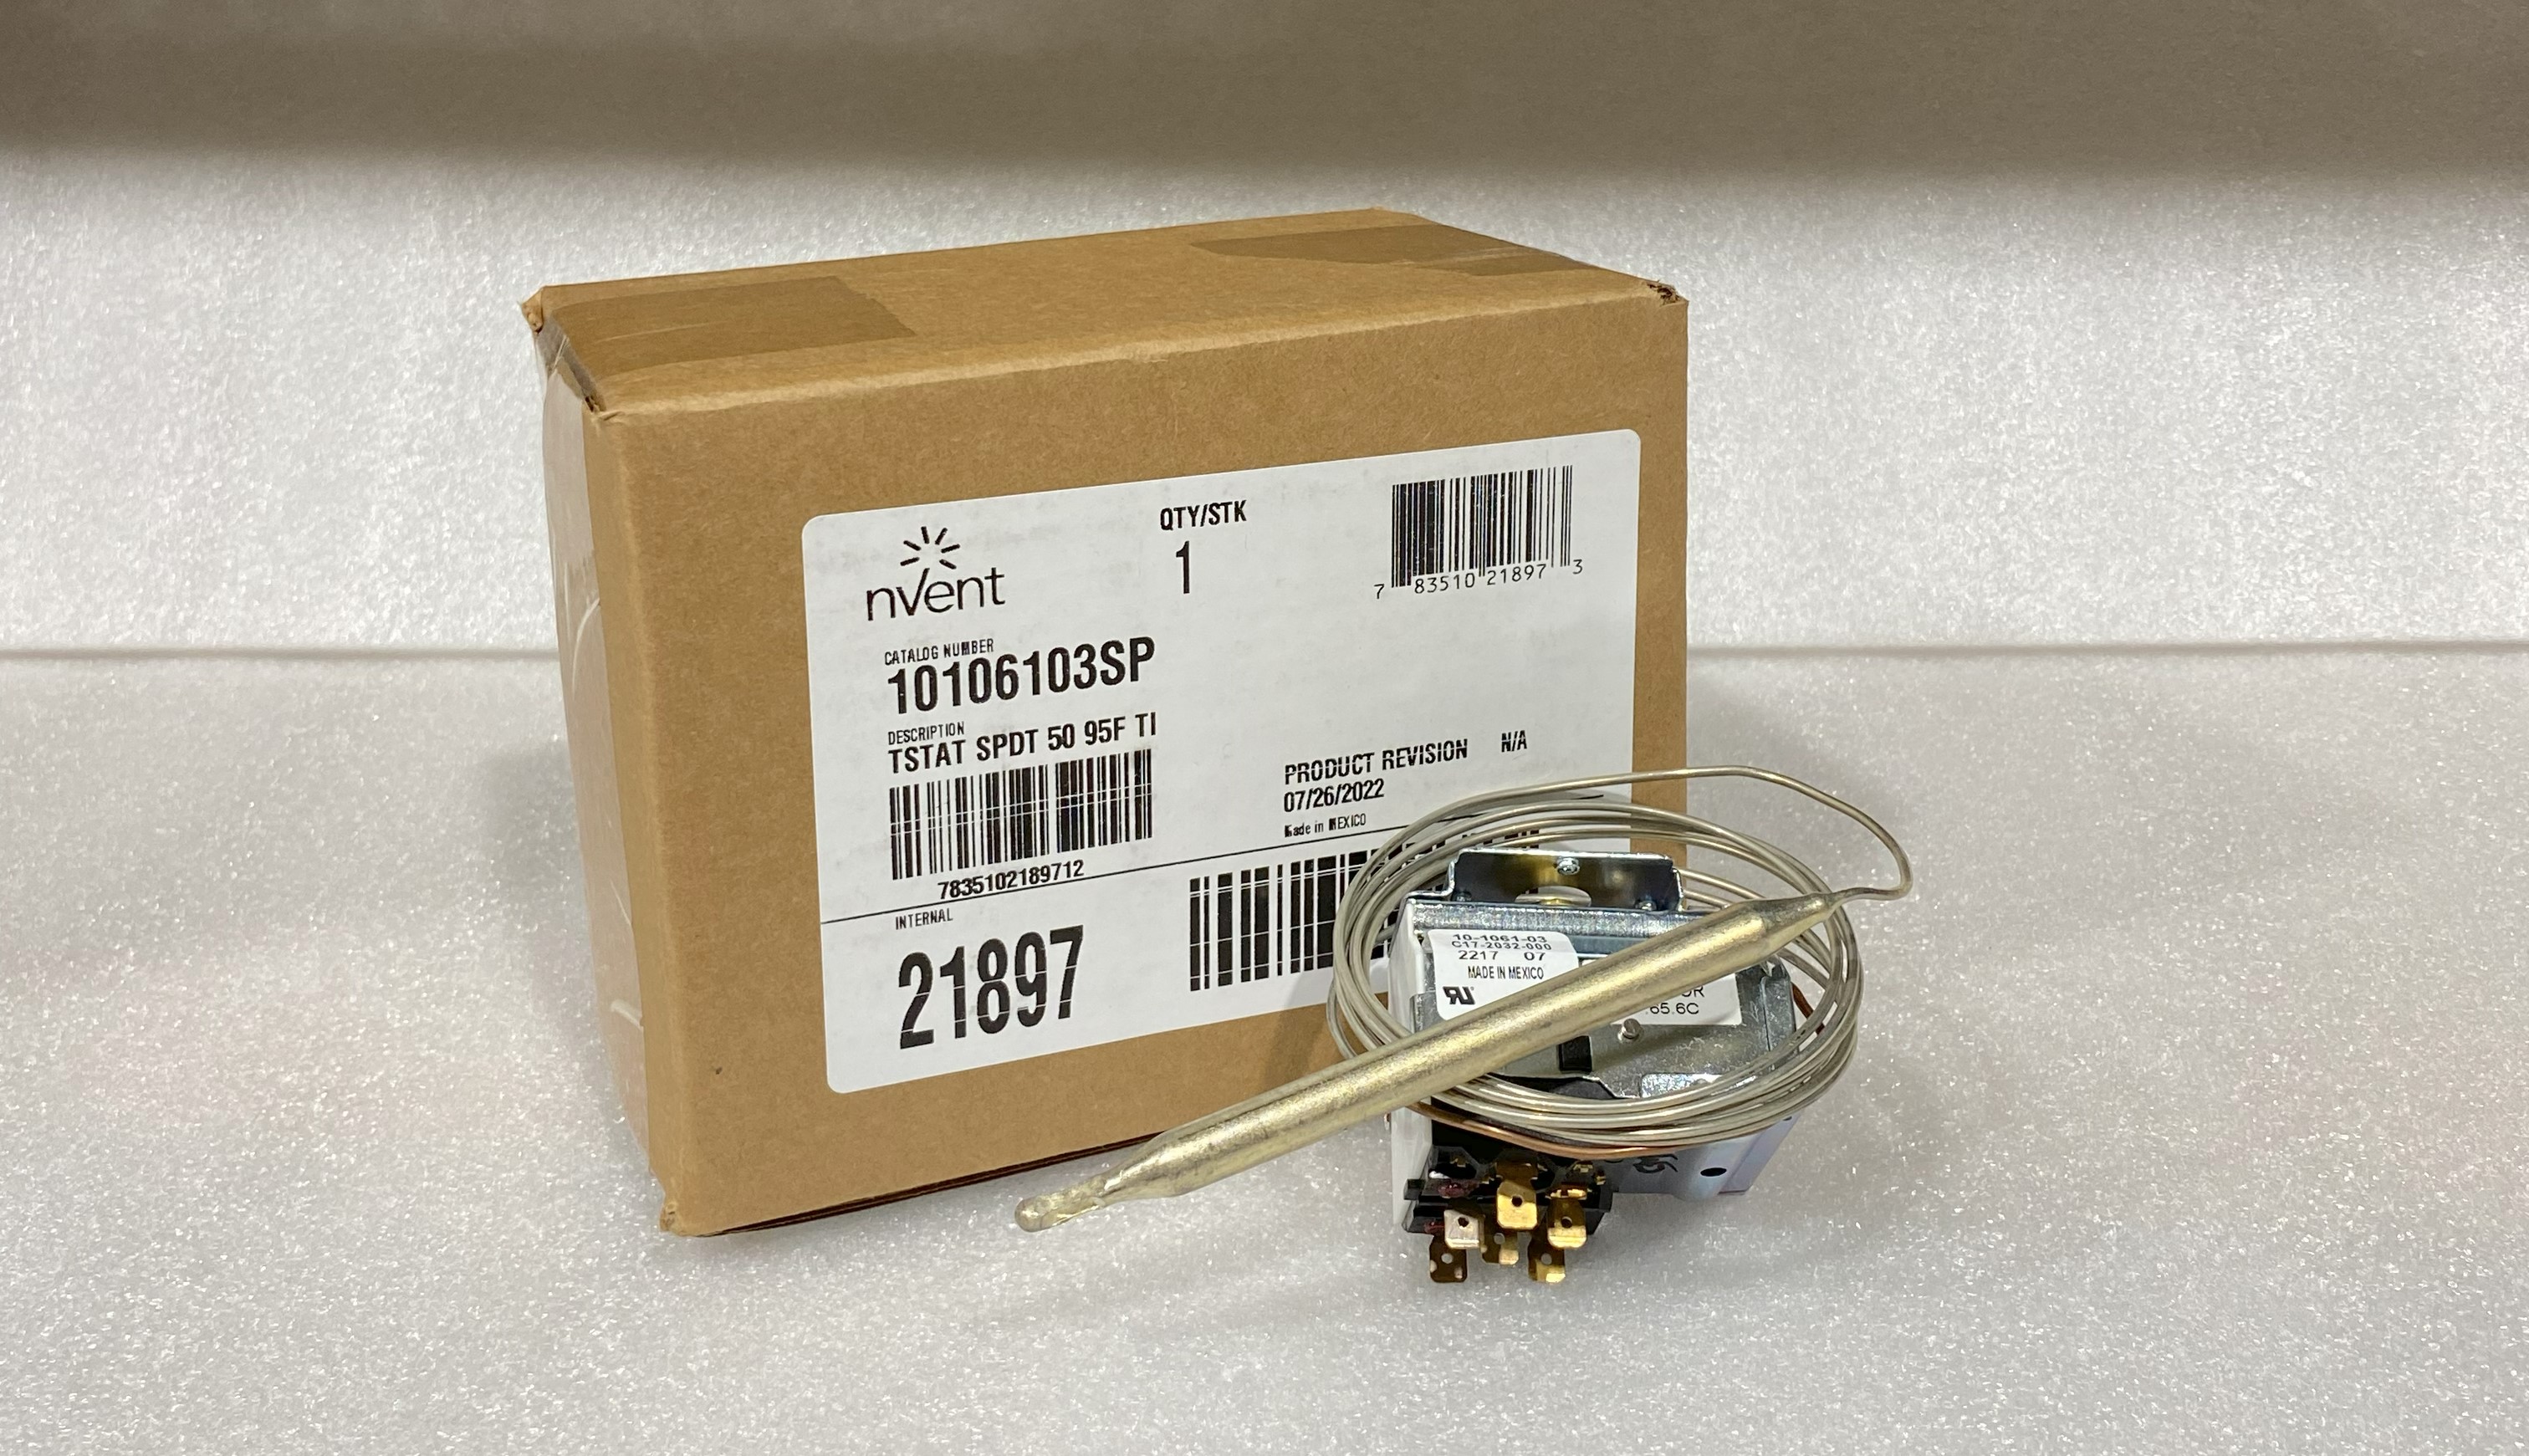 nVent 10106103SP Thermostat